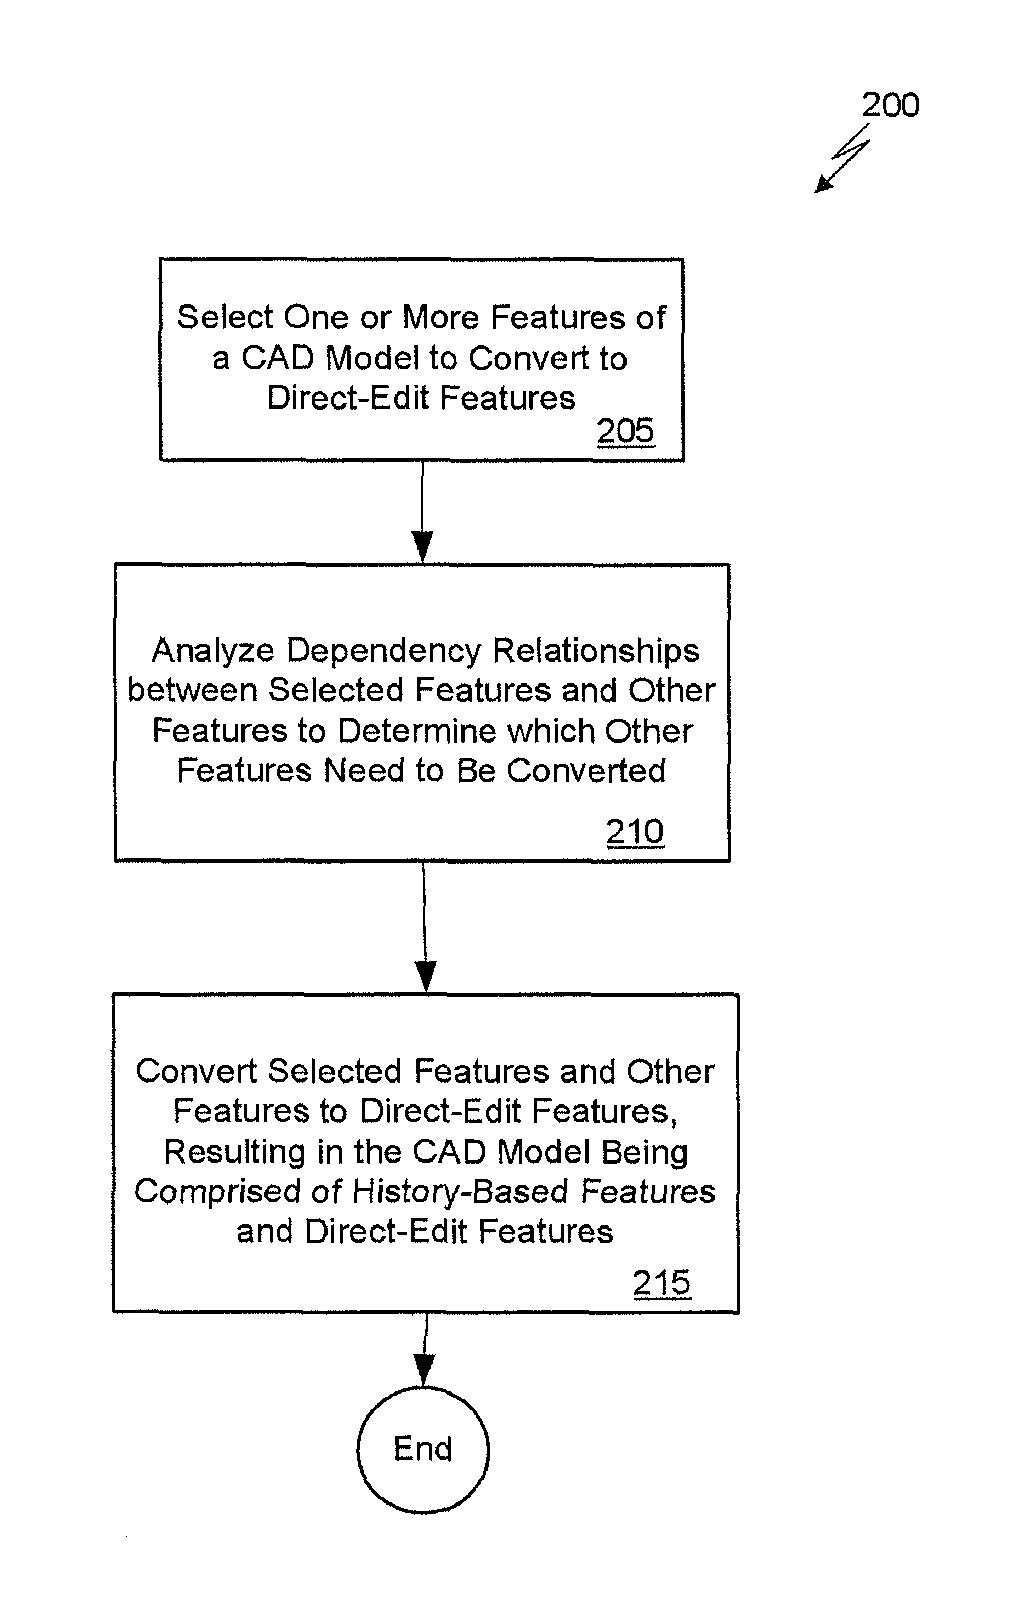 Methods and systems for converting select features of a computer-aided design (CAD) model to direct-edit features